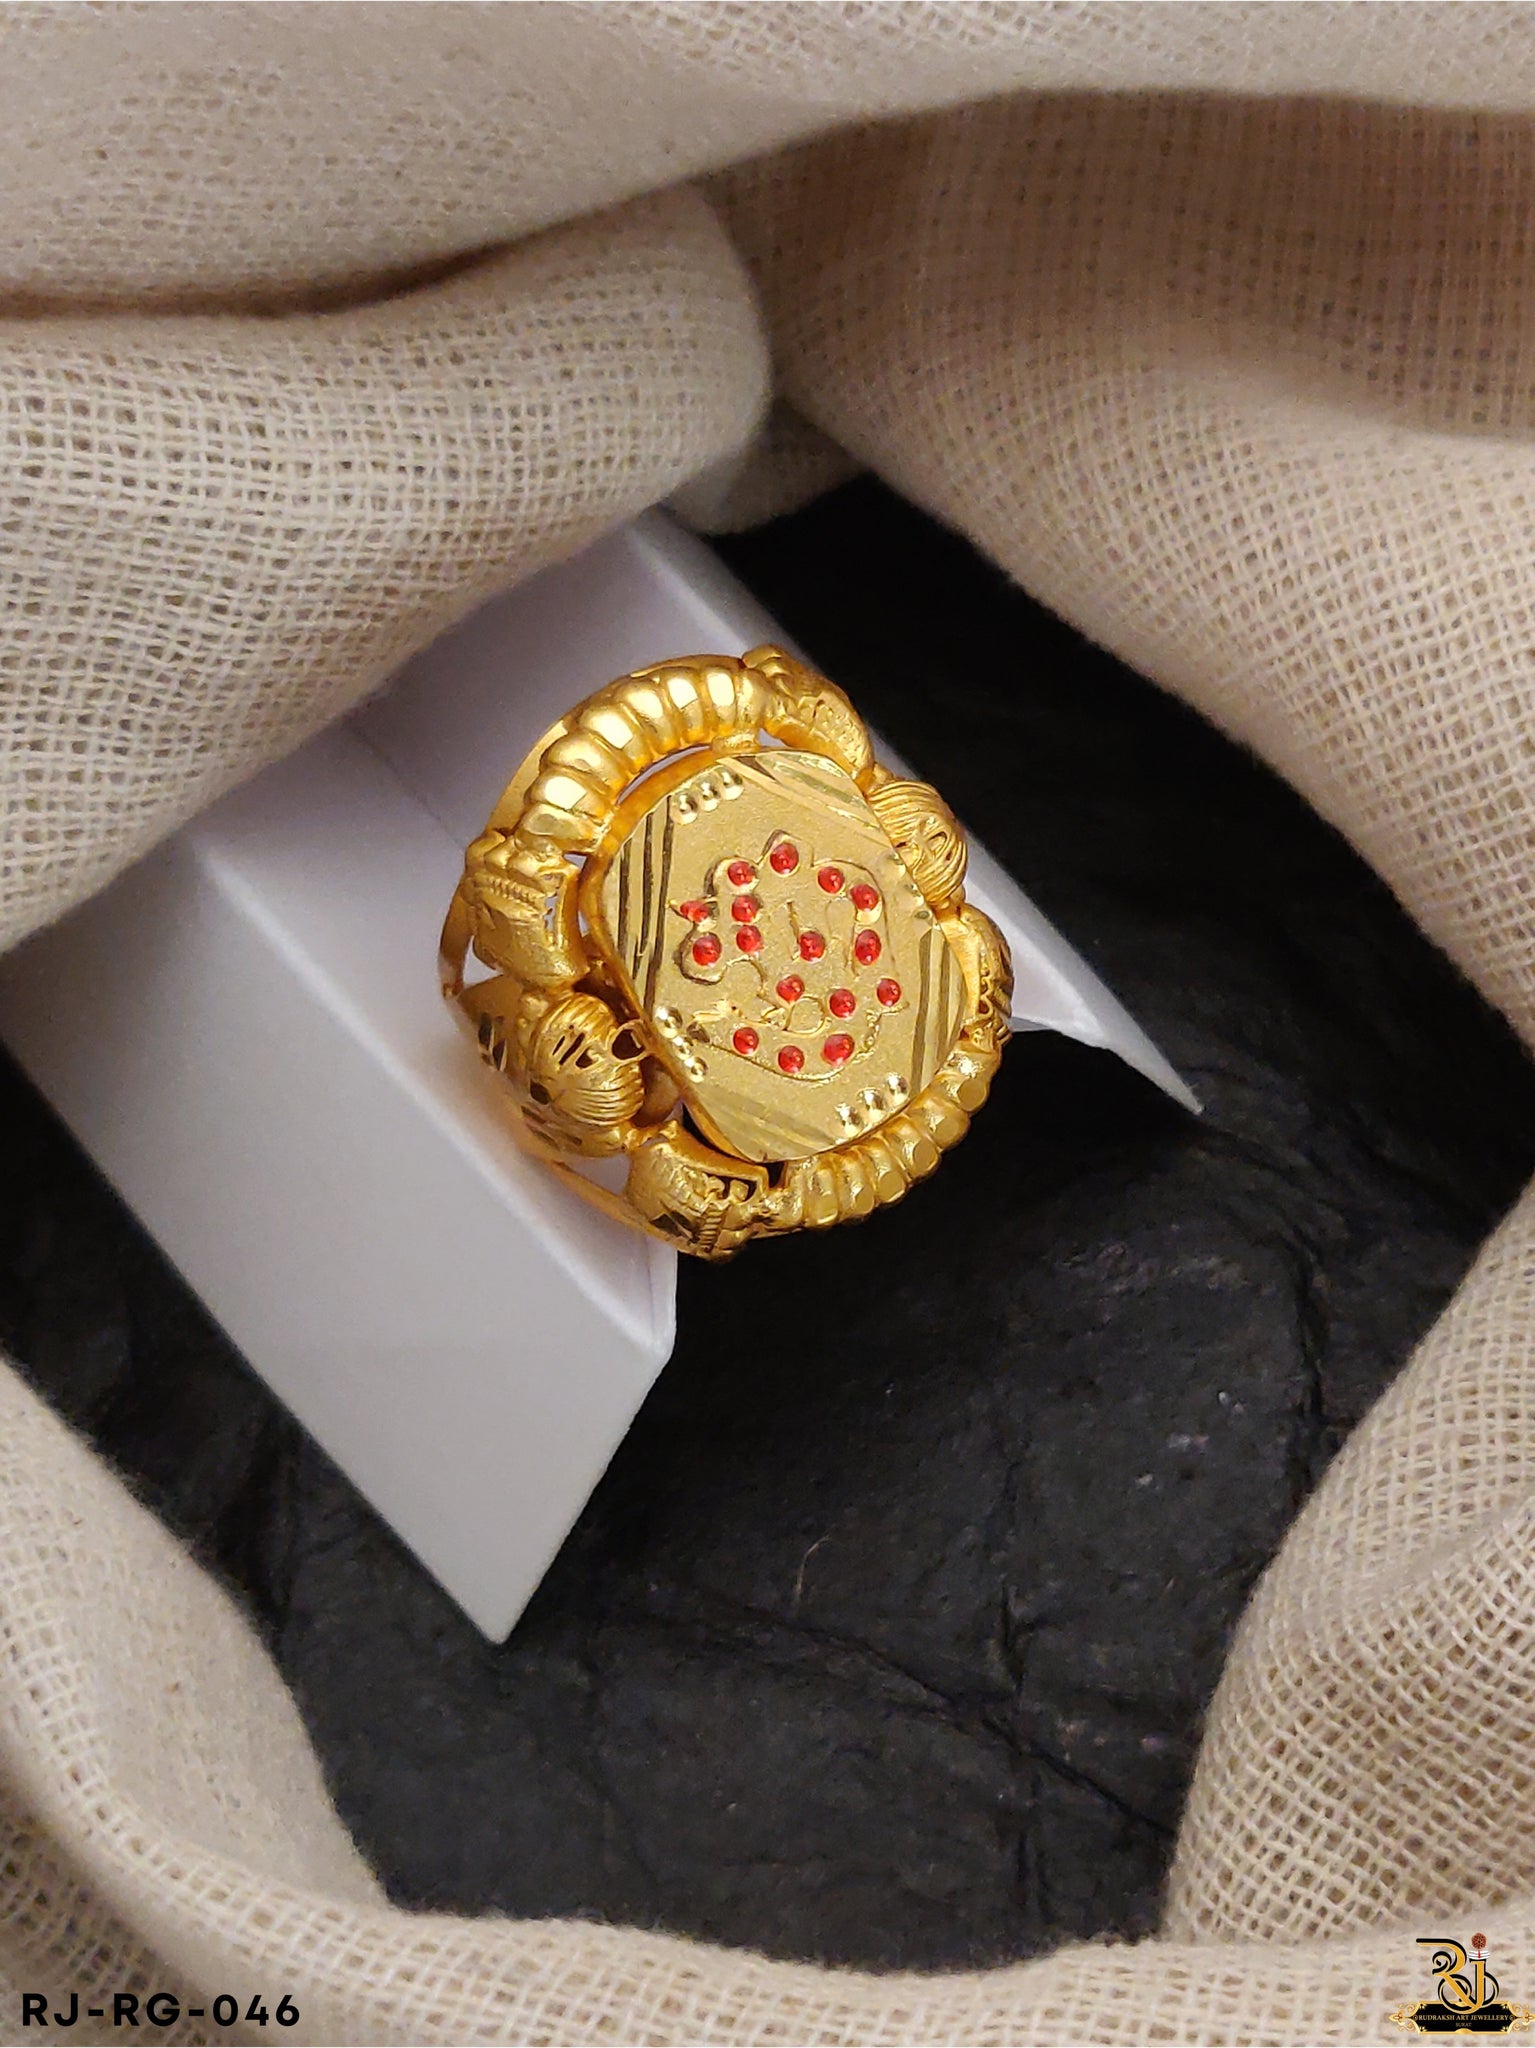 Buy quality 916 Gold Fancy Gent's Ring in Ahmedabad